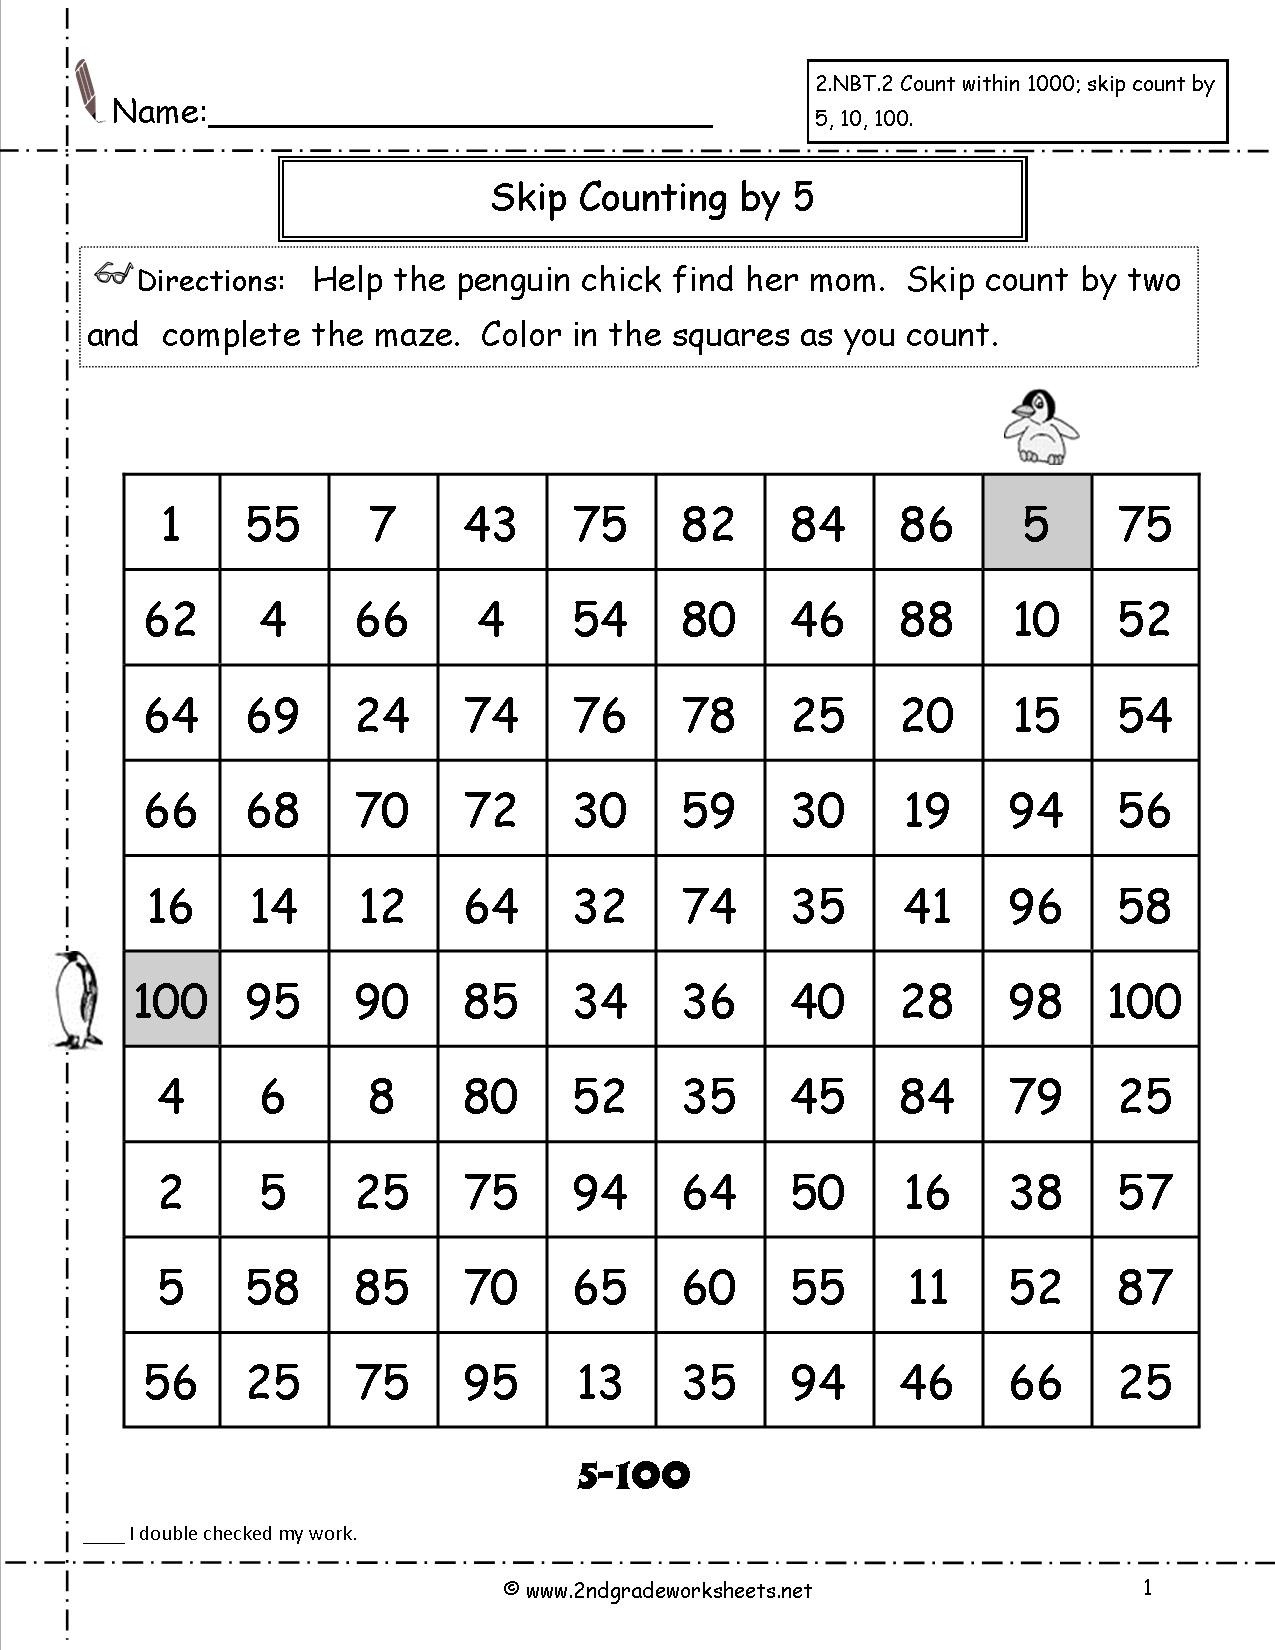 Counting by 5s Worksheet Skip Count by 20 Worksheet